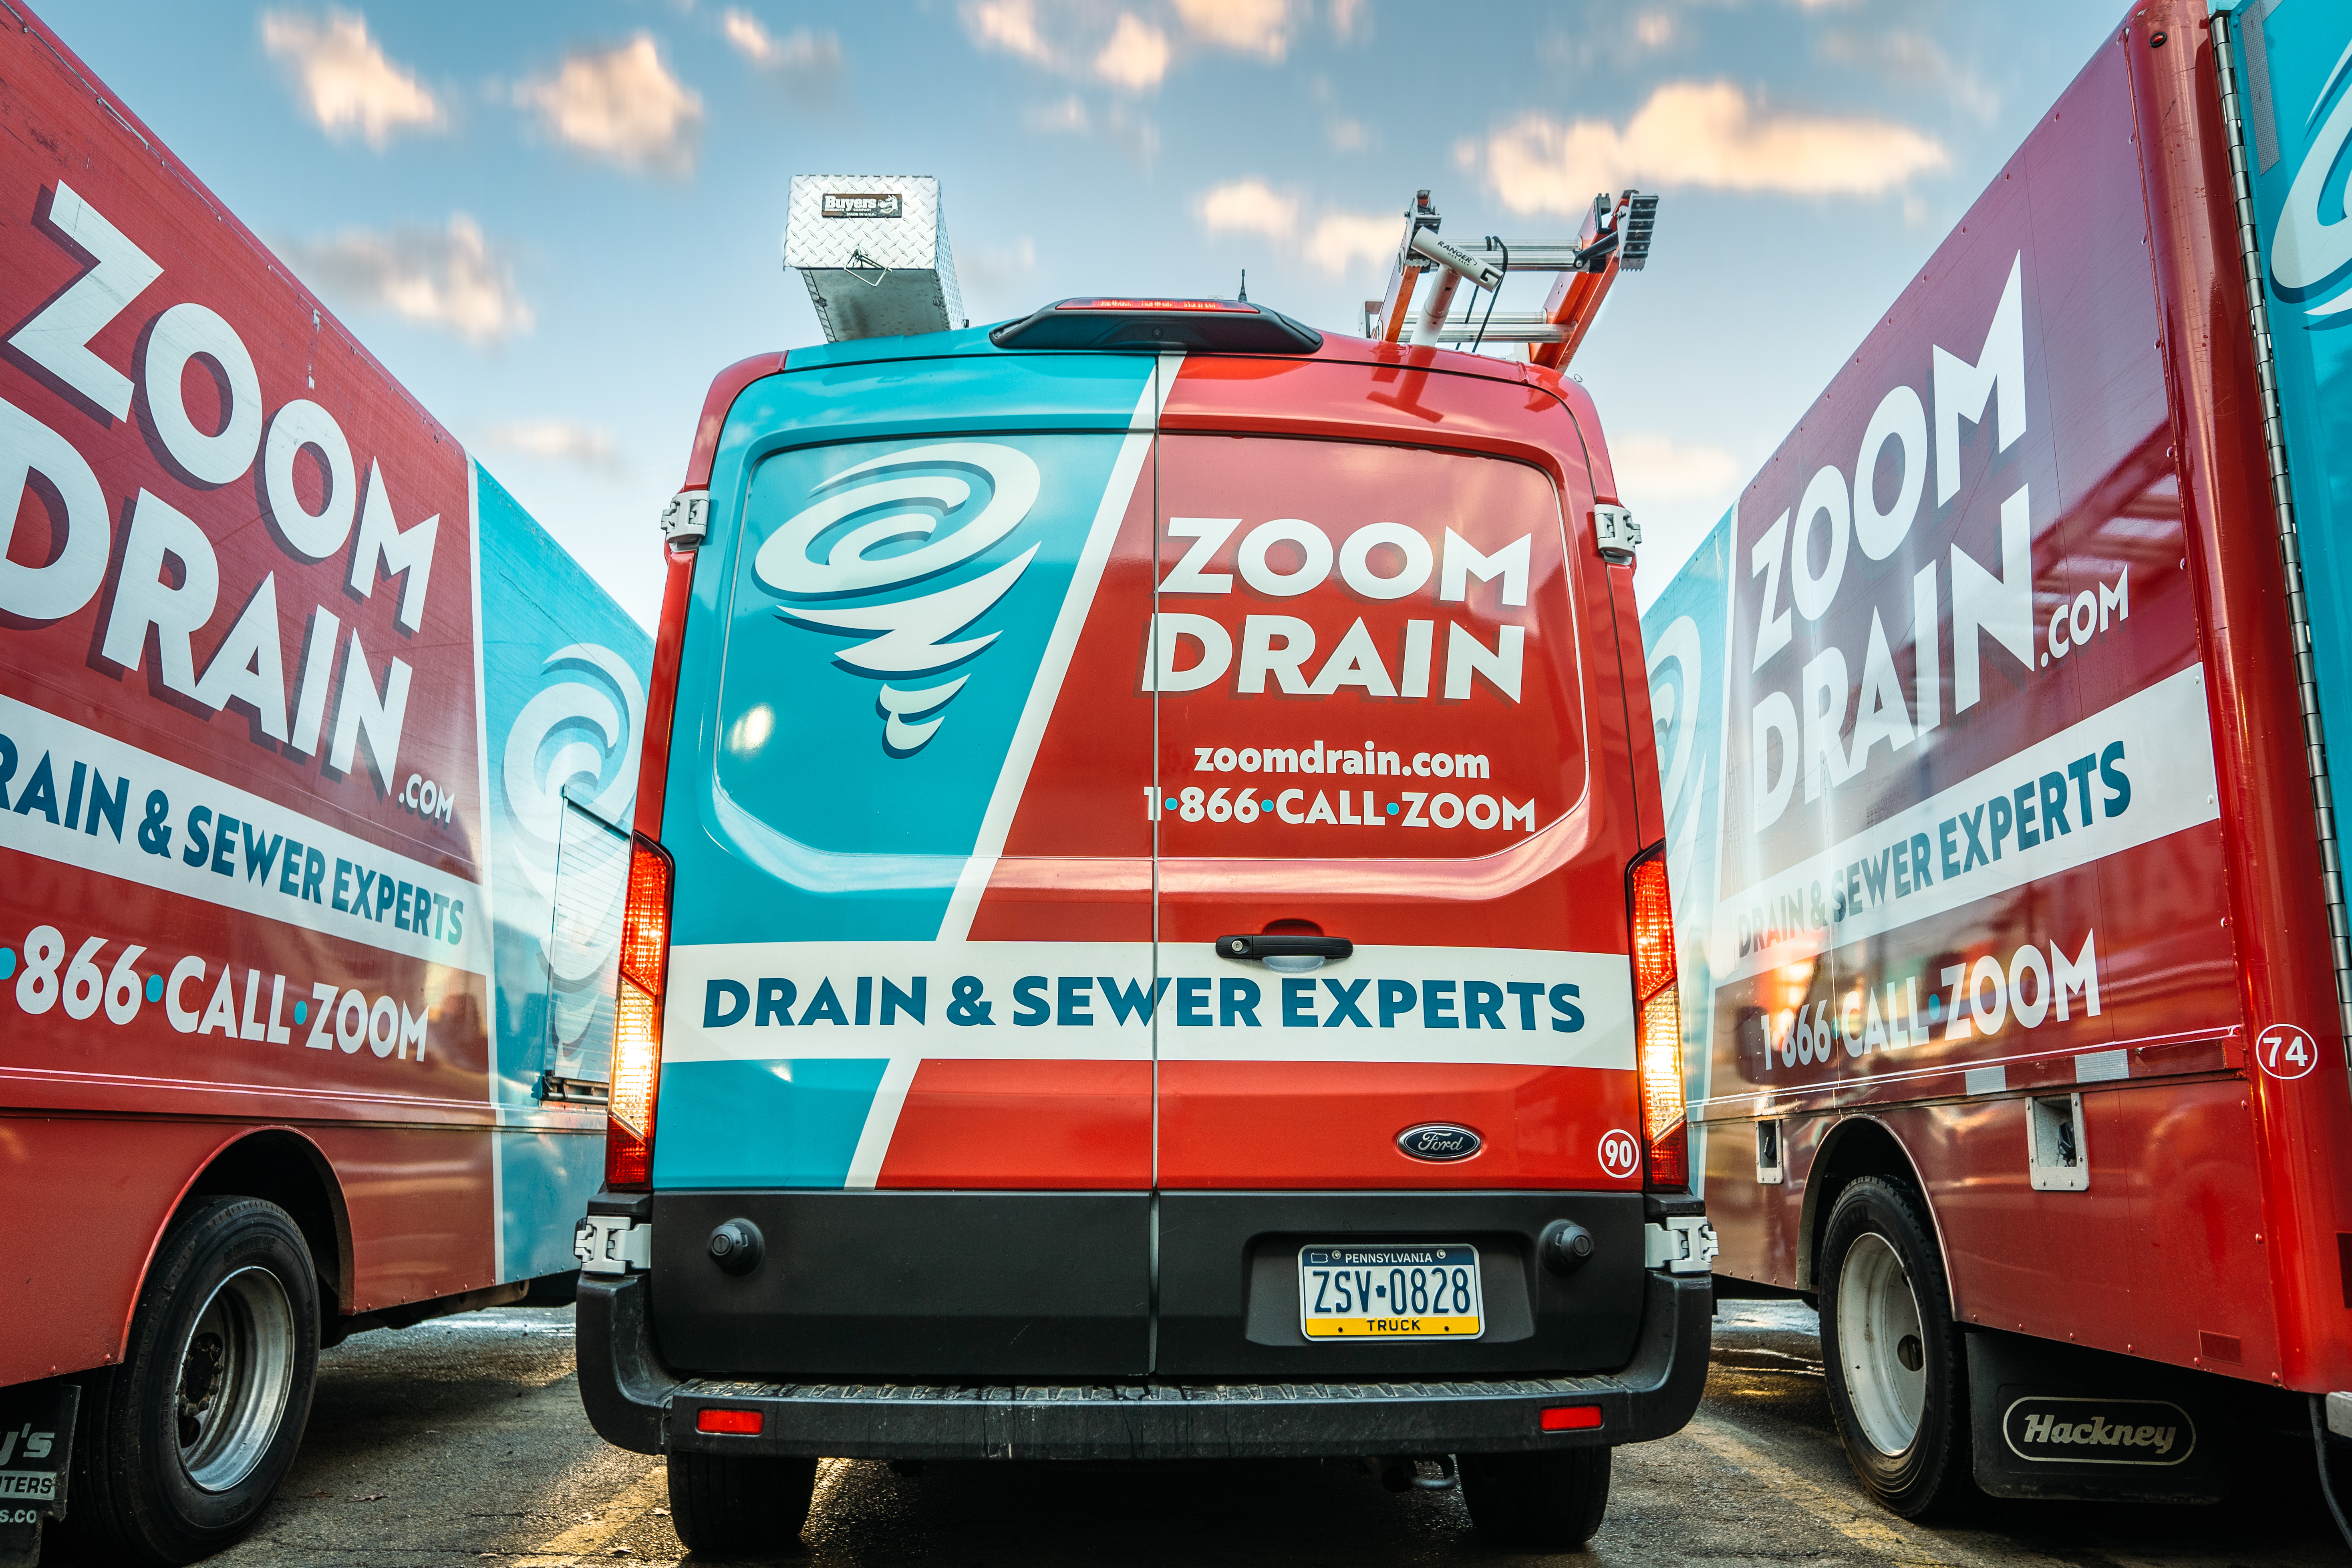 Now Open: Get To Know The Owner Of Zoom Drain Jacksonville!